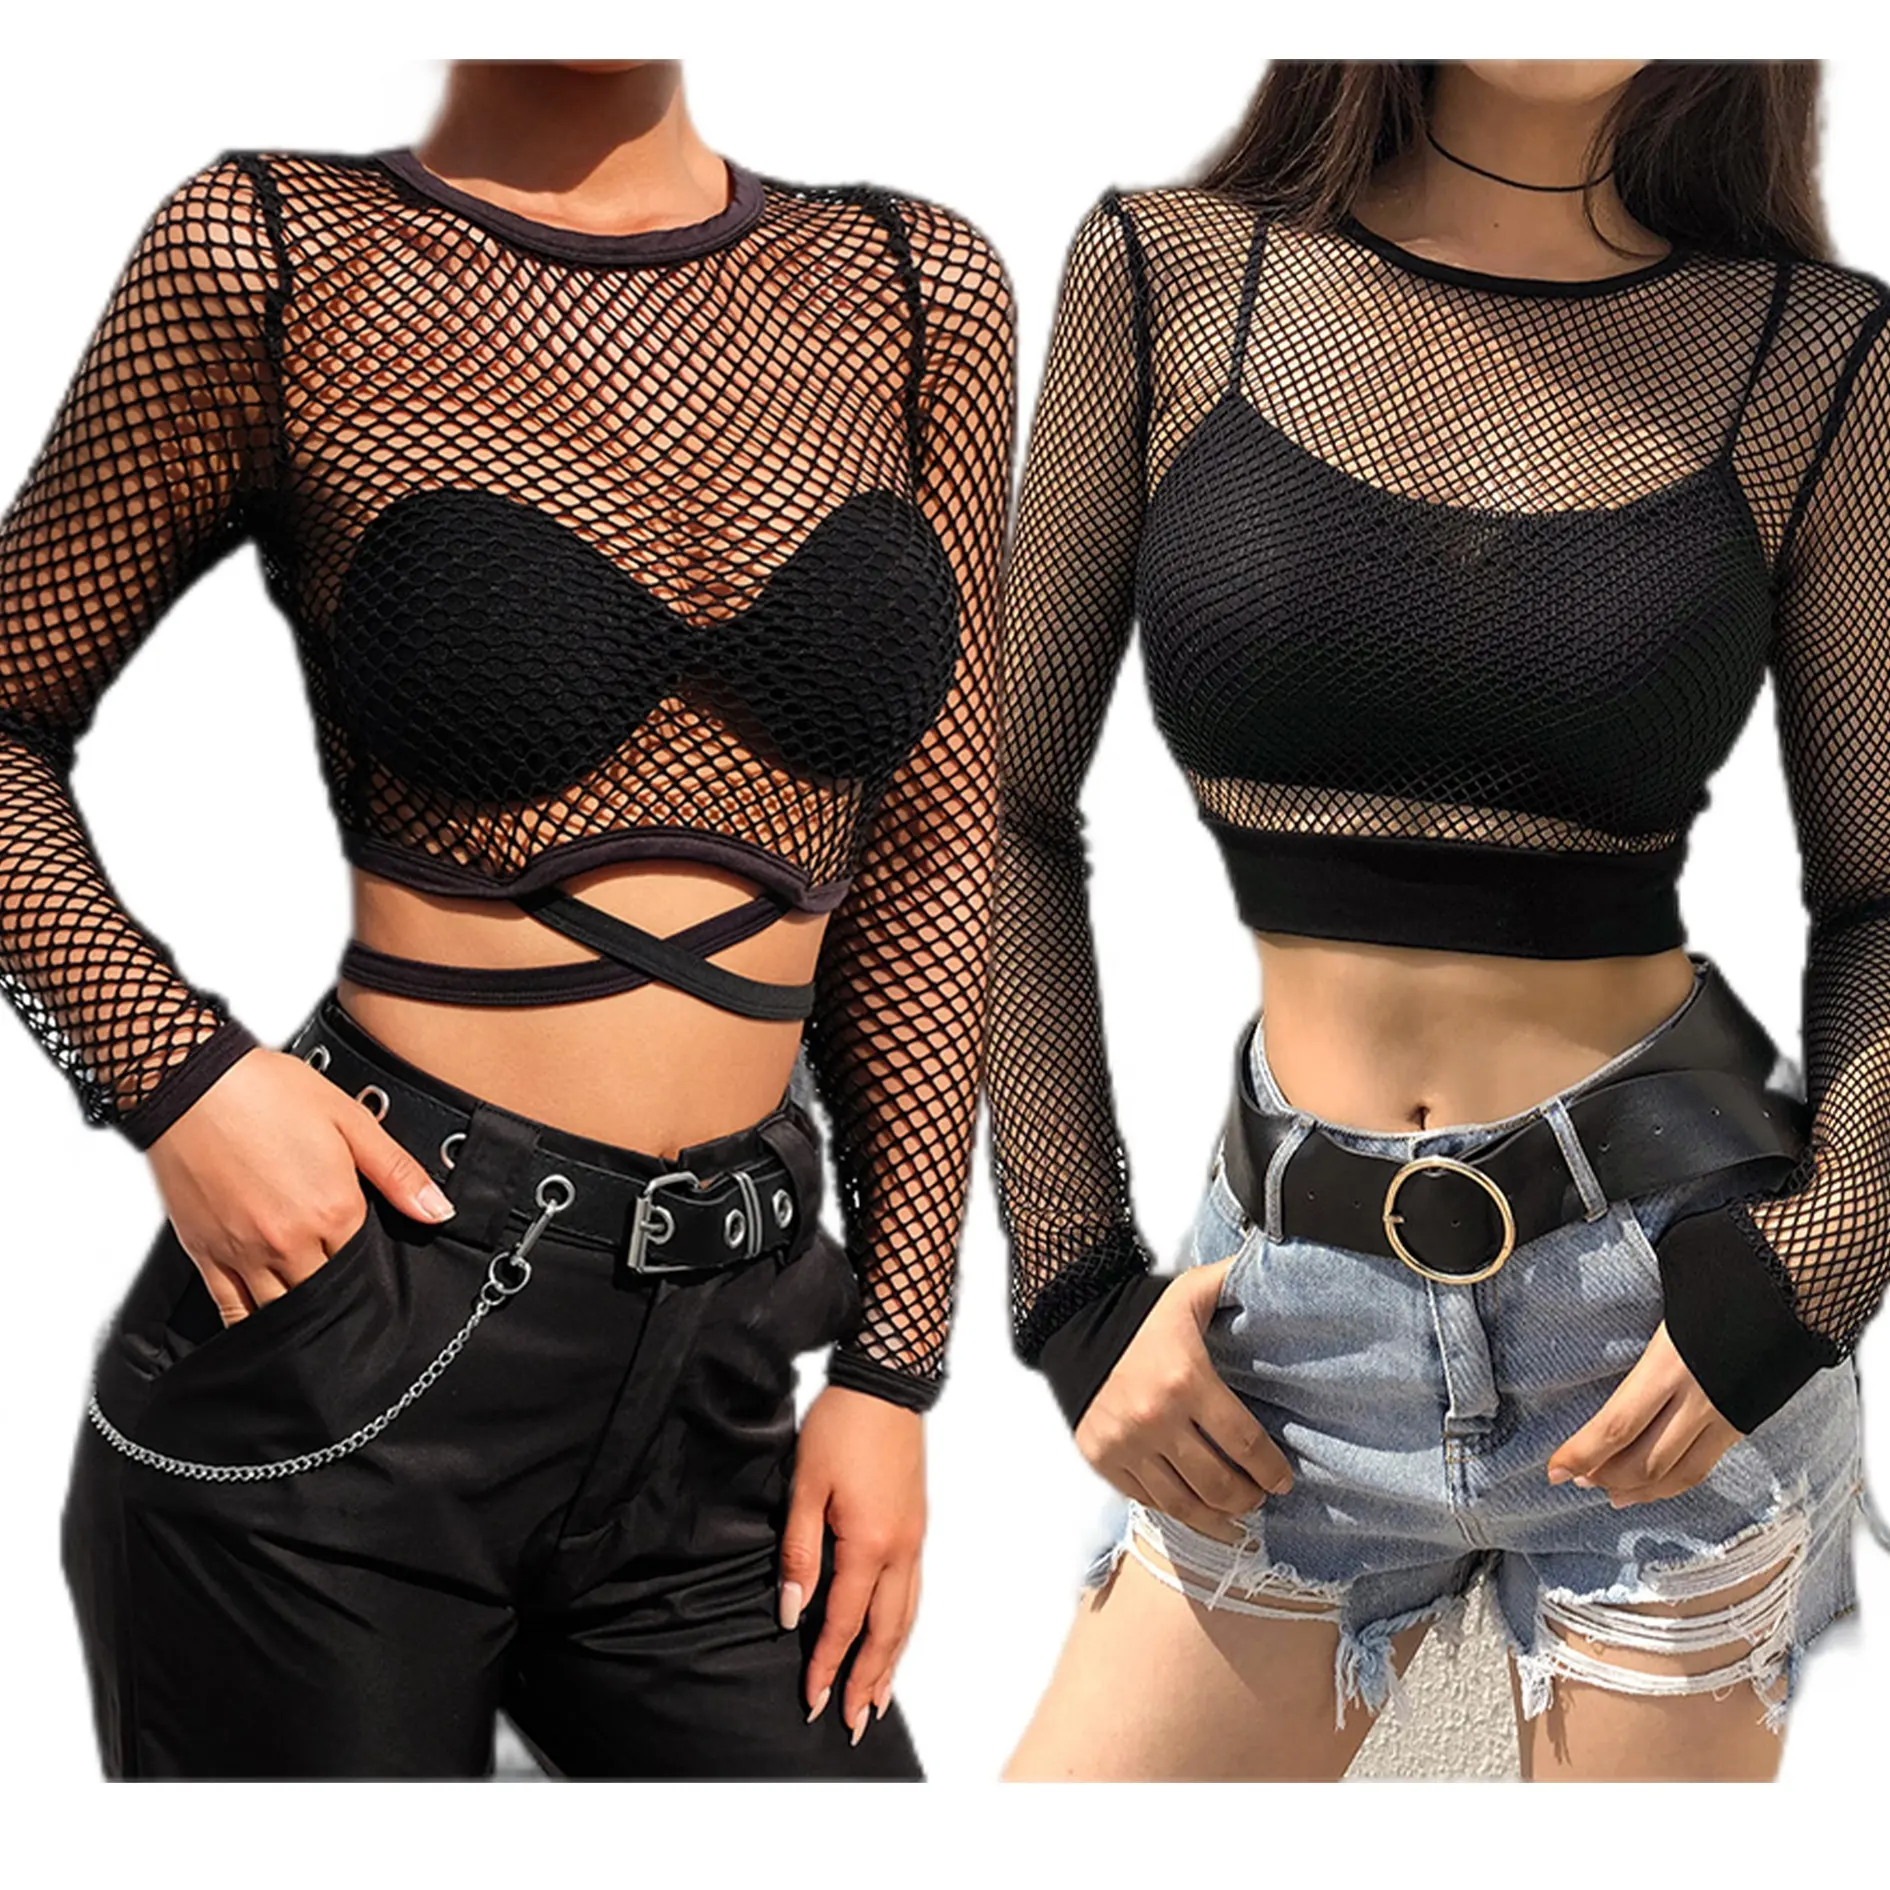 Casual Streetwear Women Clothing Goth Hollow Out Sexy Fishnet Long Sleeve Black See Through Mesh Cardigan T-shirt Crop Top